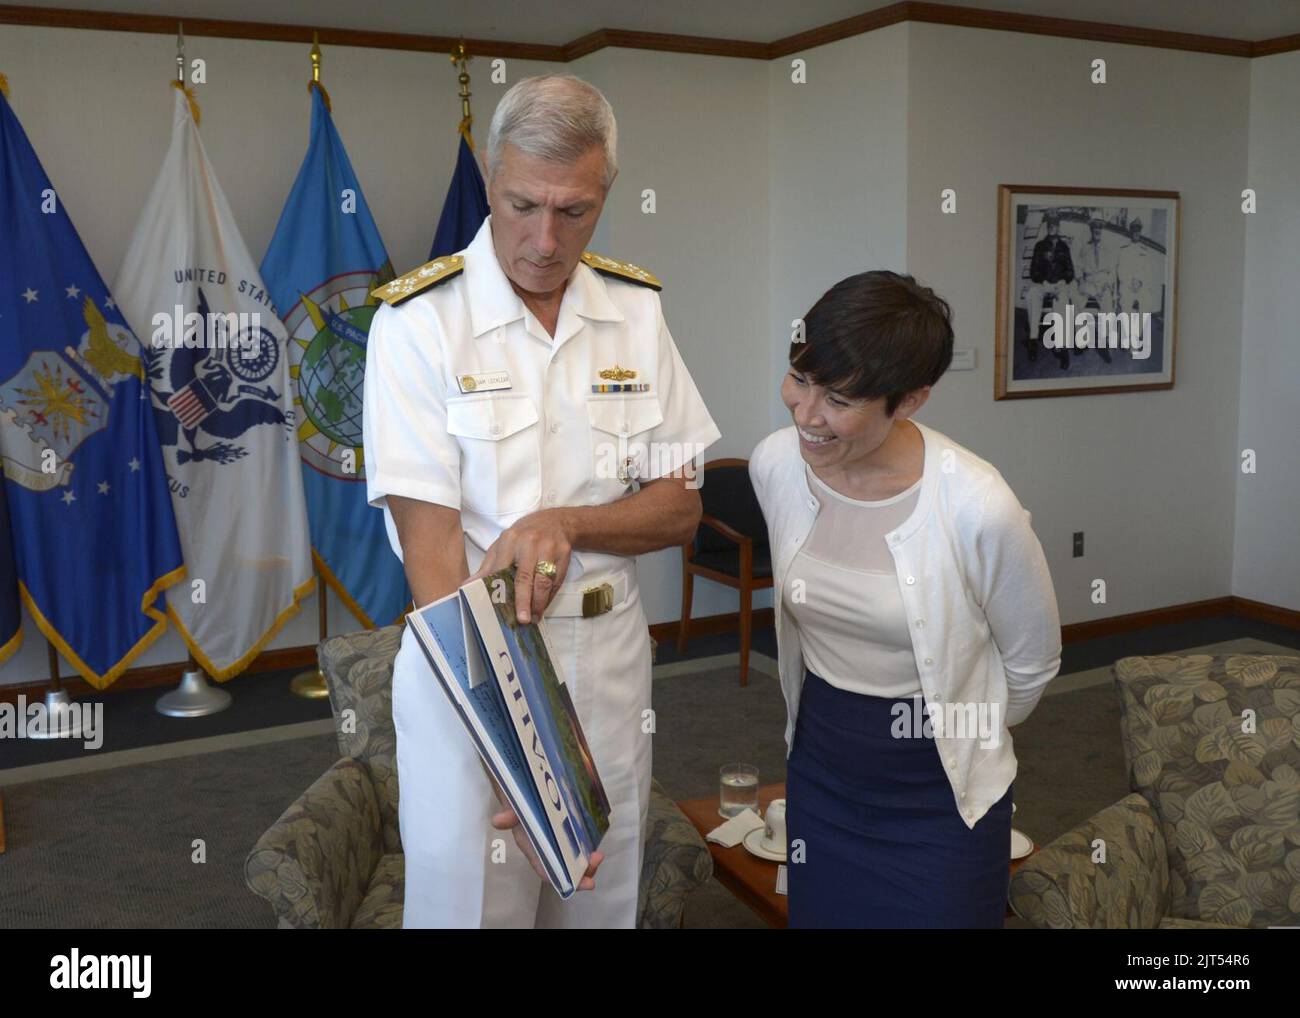 U.S. Navy Adm. Samuel J. Locklear, left, the commander of U.S. Pacific Command, gives a book to Norwegian Defense Minister Ine Eriksen Søreide during Rim of the Pacific (RIMPAC) 2014 at Camp H.M. Smith, Hawaii, J 140630 Stock Photo